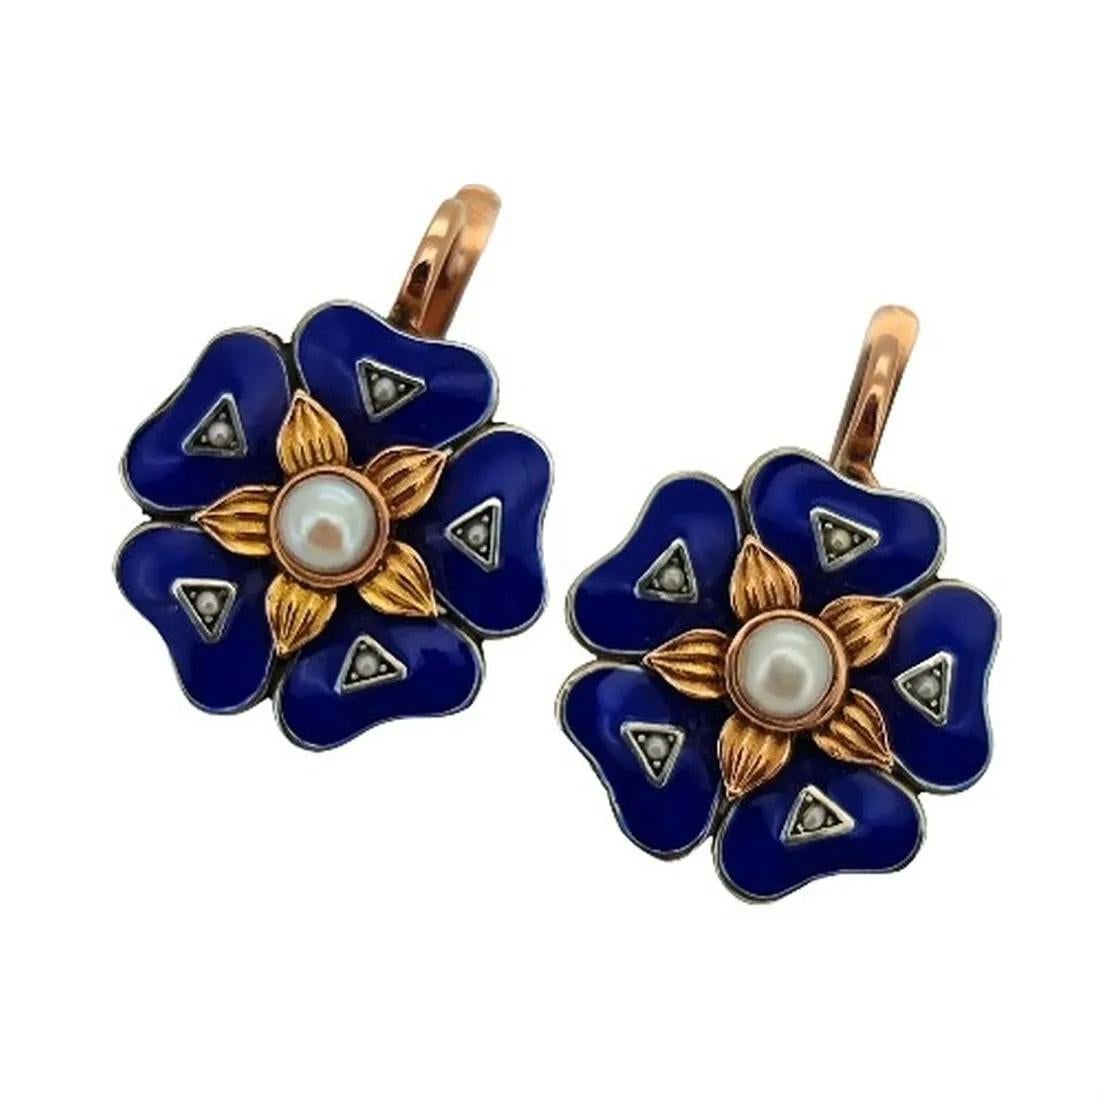 Unique and extremely rare a pair of The End of the 19th CENTURY ,A BEAUTIFUL Pair of IMPERIAL RUSSIAN 14KT Rose Gold Pearl Enamel Earrings.

Circa 1880 

Rose Gold Earrings are finely modeled as stylized flower heads and are completely covered with